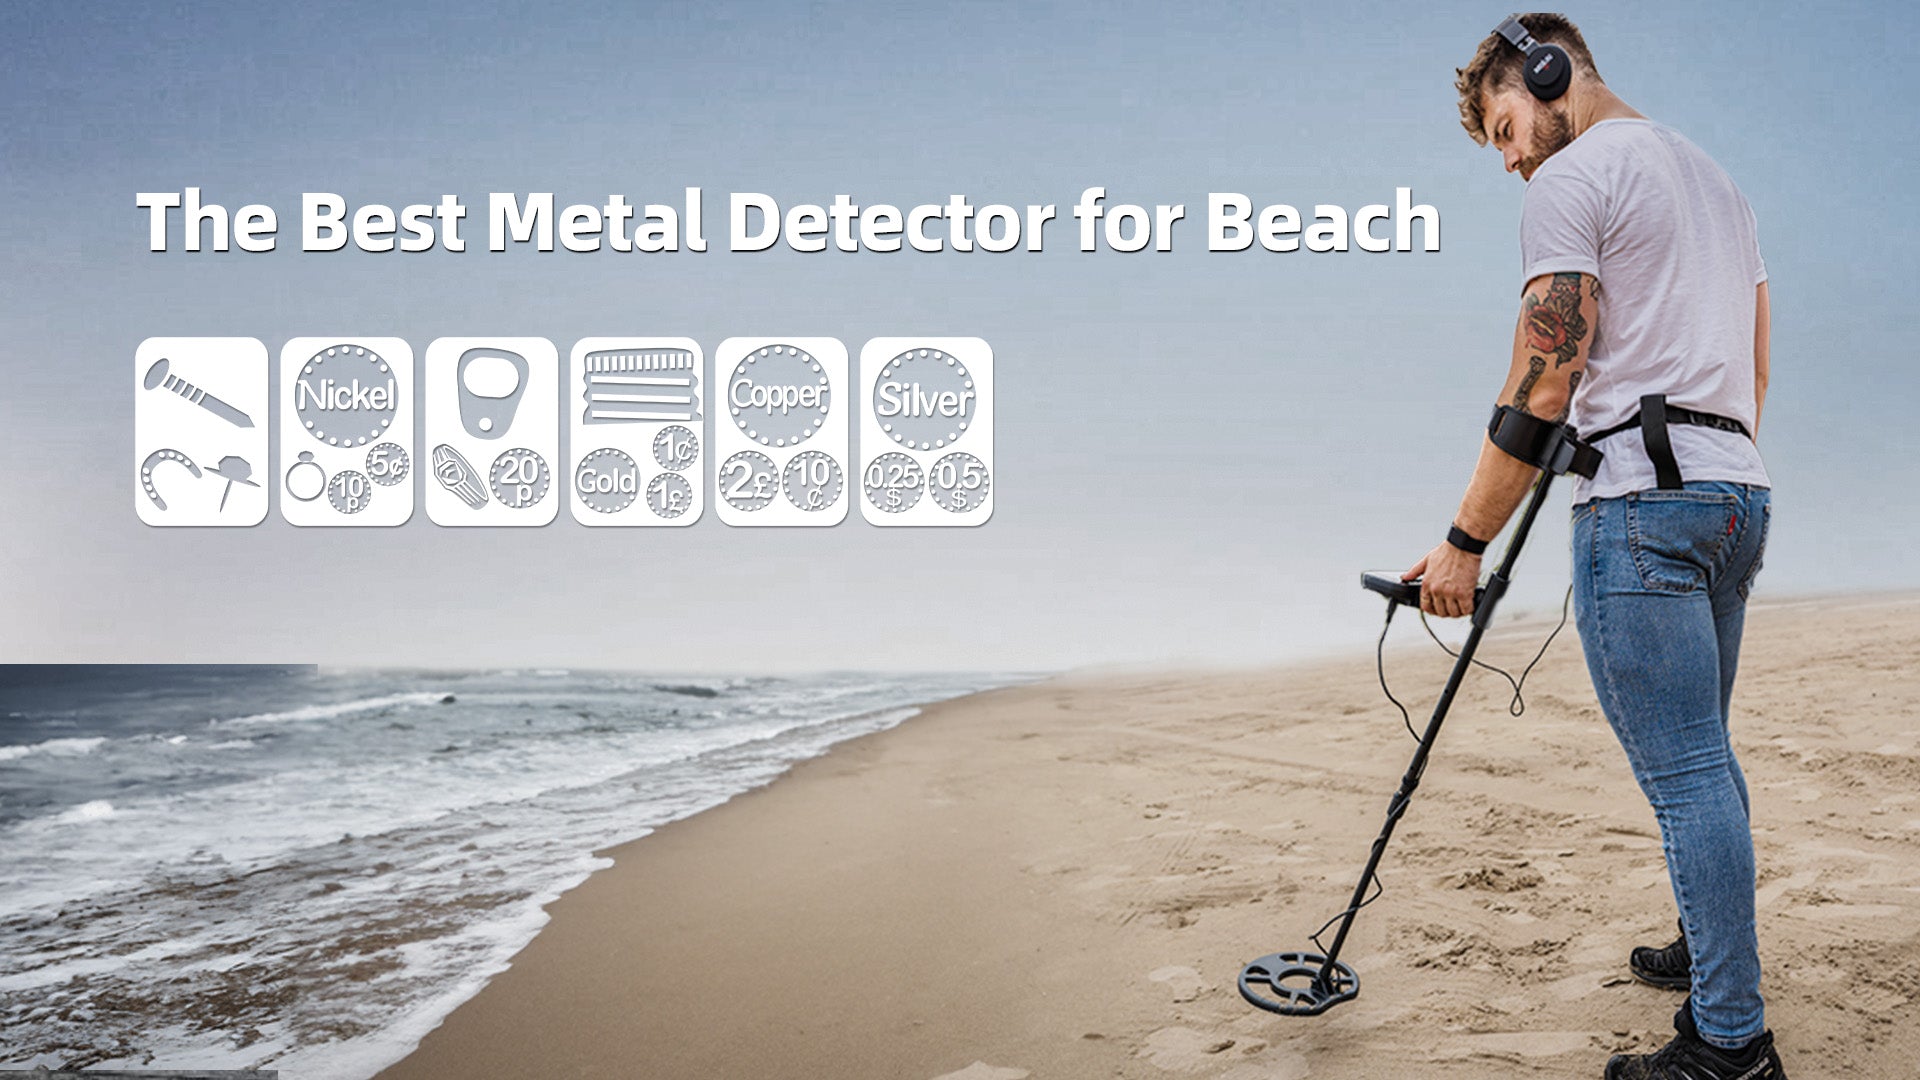 Man with a metal detector on the beach, icons of metals and treasures displayed above